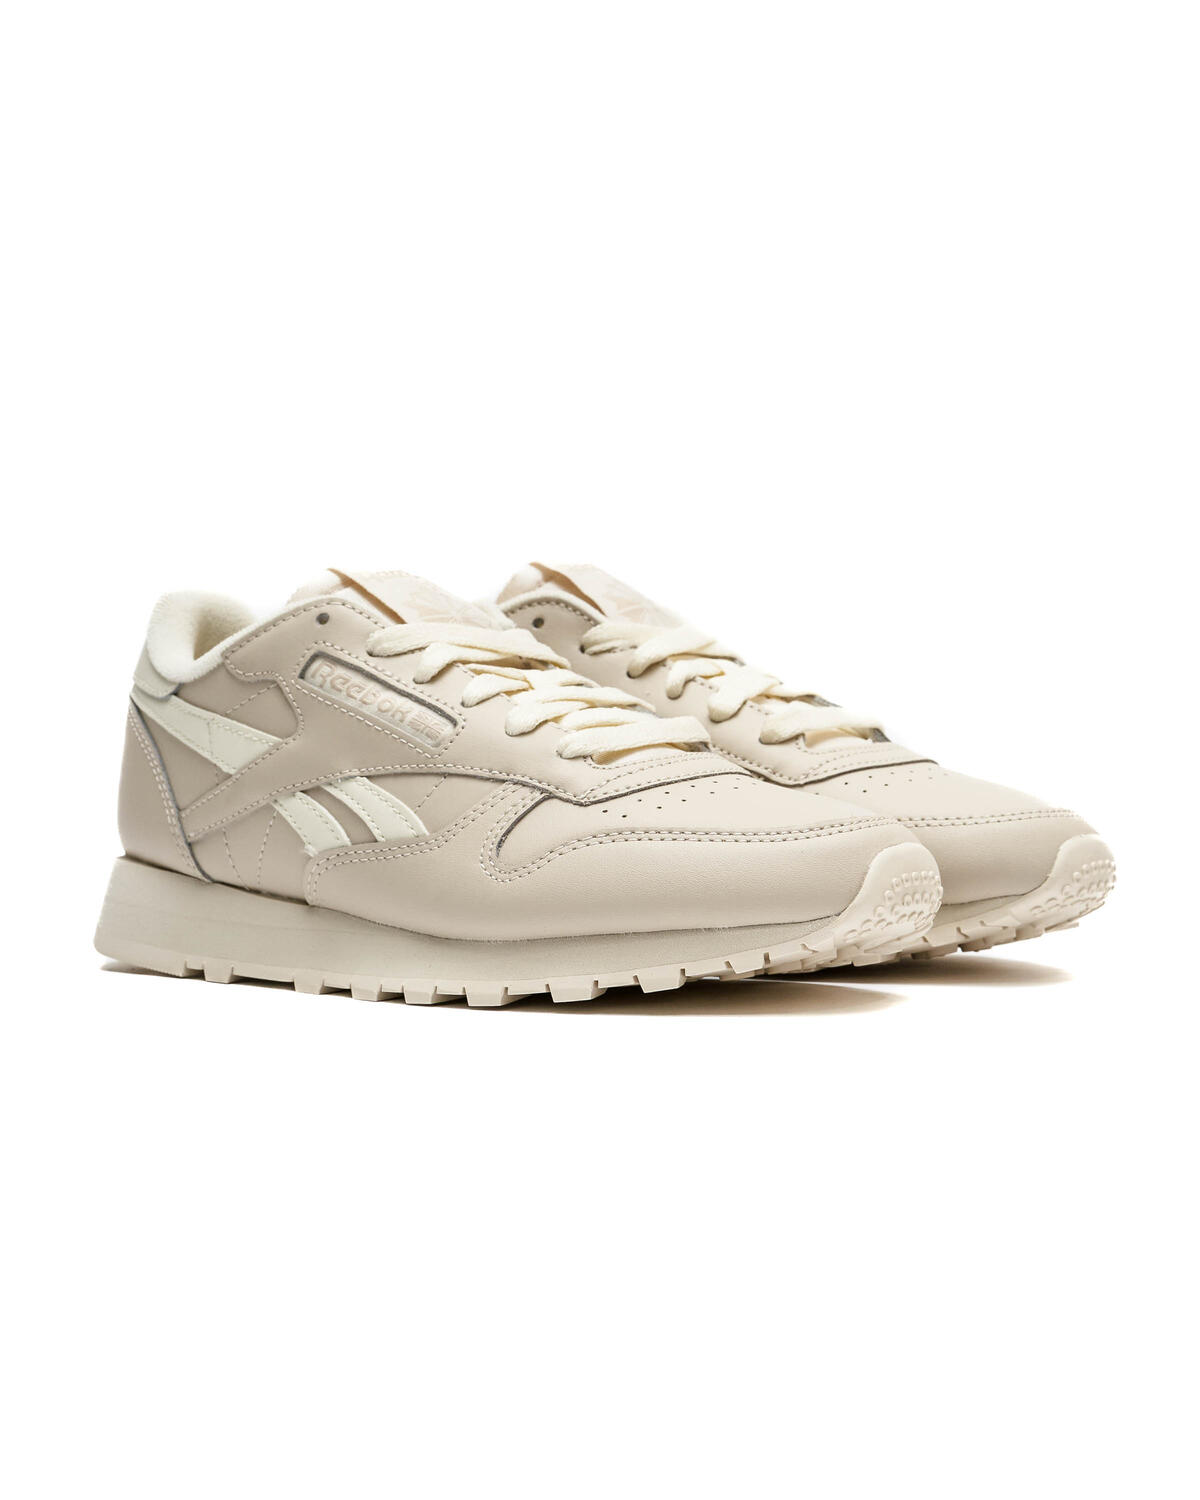 AFEW LEATHER CLASSIC STORE Reebok WMNS IG9481 | |